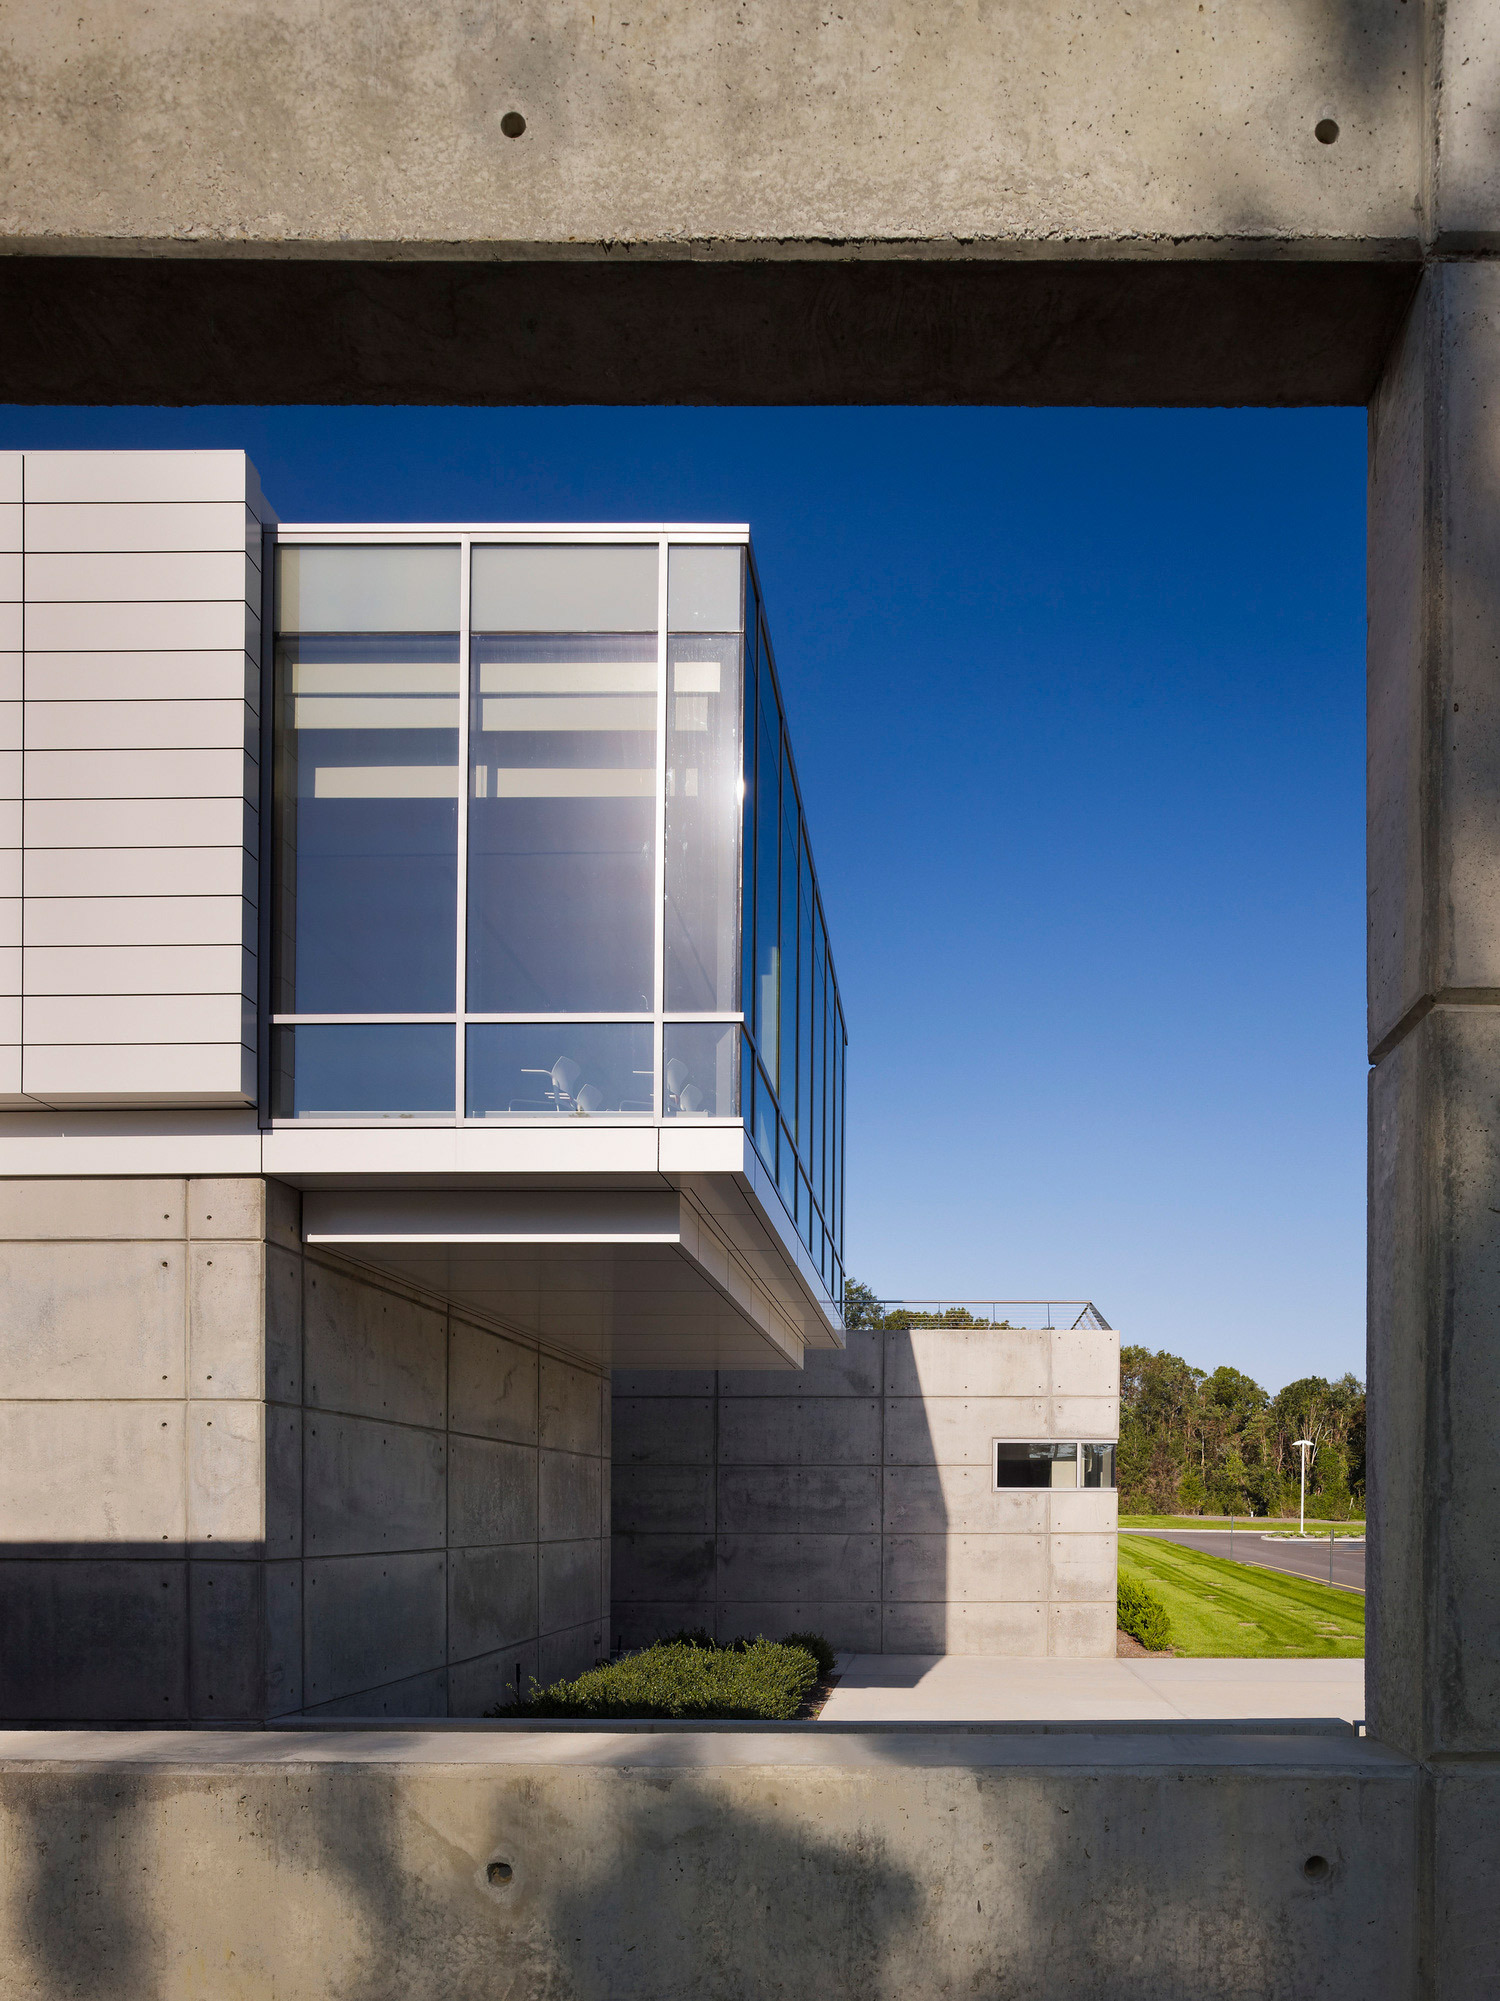 Modern architectural design showcasing a juxtaposition of materials with a prominent concrete frame, a sleek glass facade, and metal paneling complemented by clean lines and a minimalist aesthetic. The overhanging structure creates an inviting outdoor balcony space, reflecting a contemporary approach to form and function.